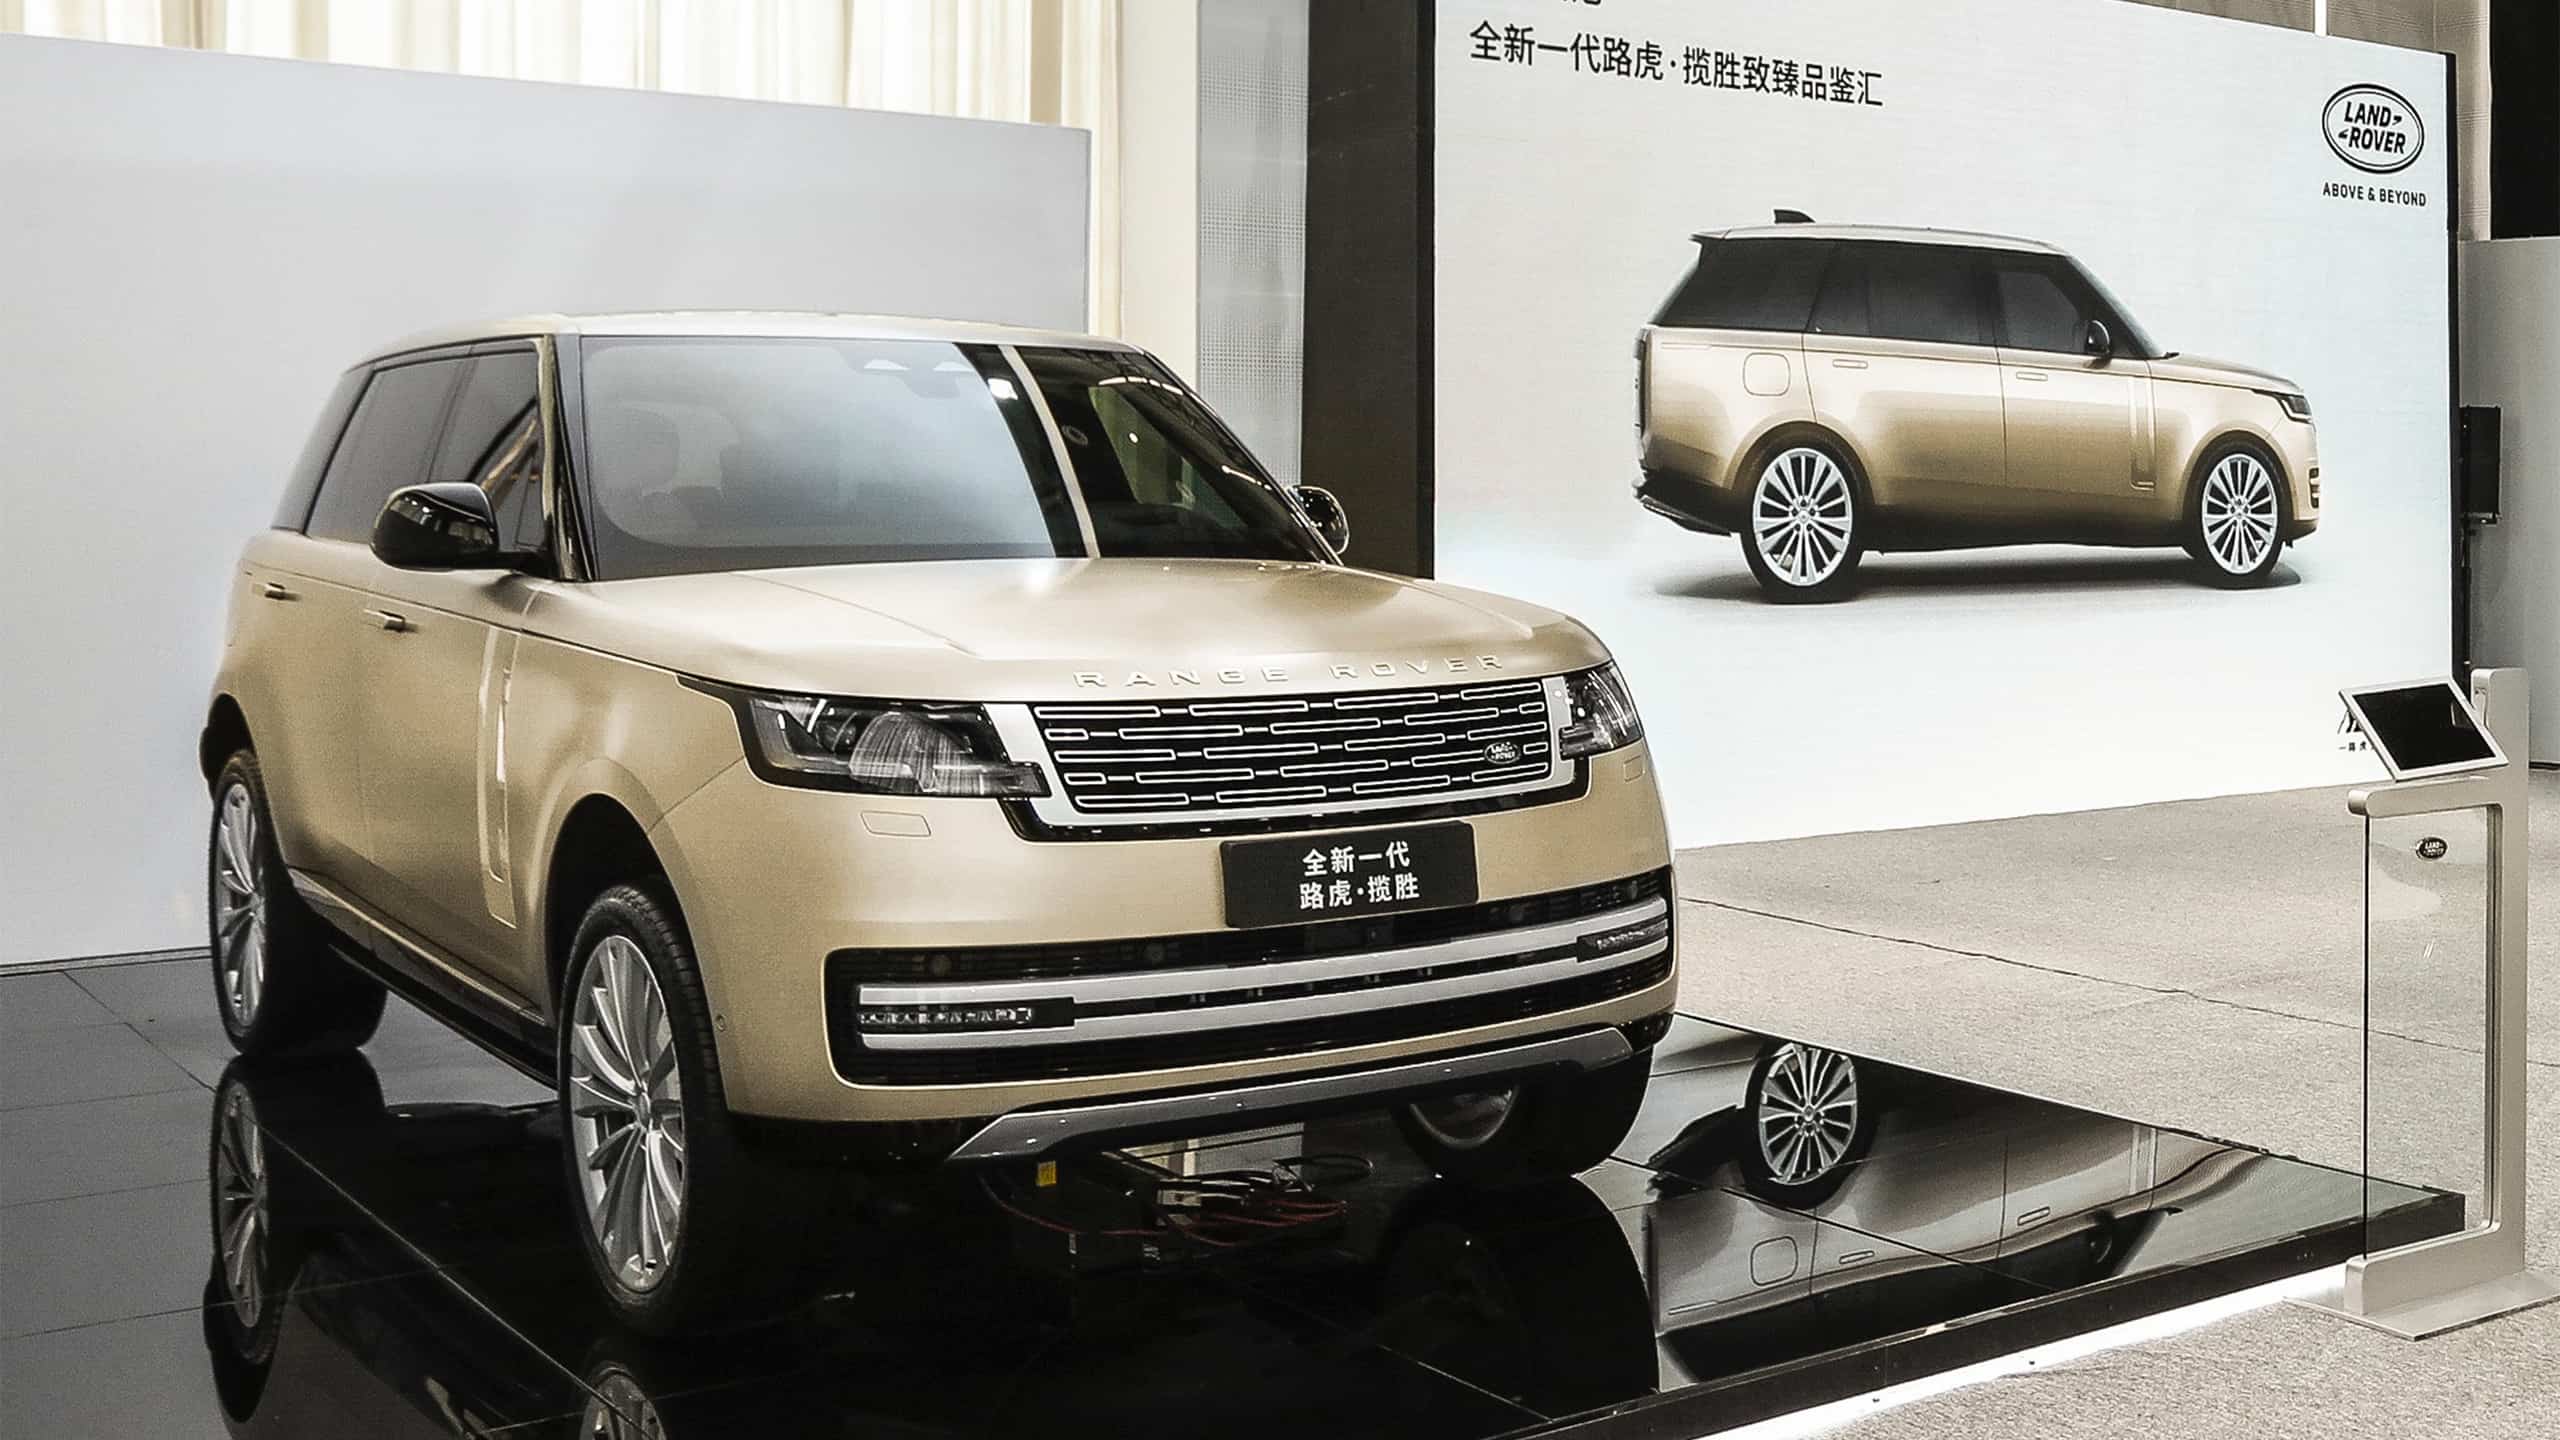 New Range Rover in the event